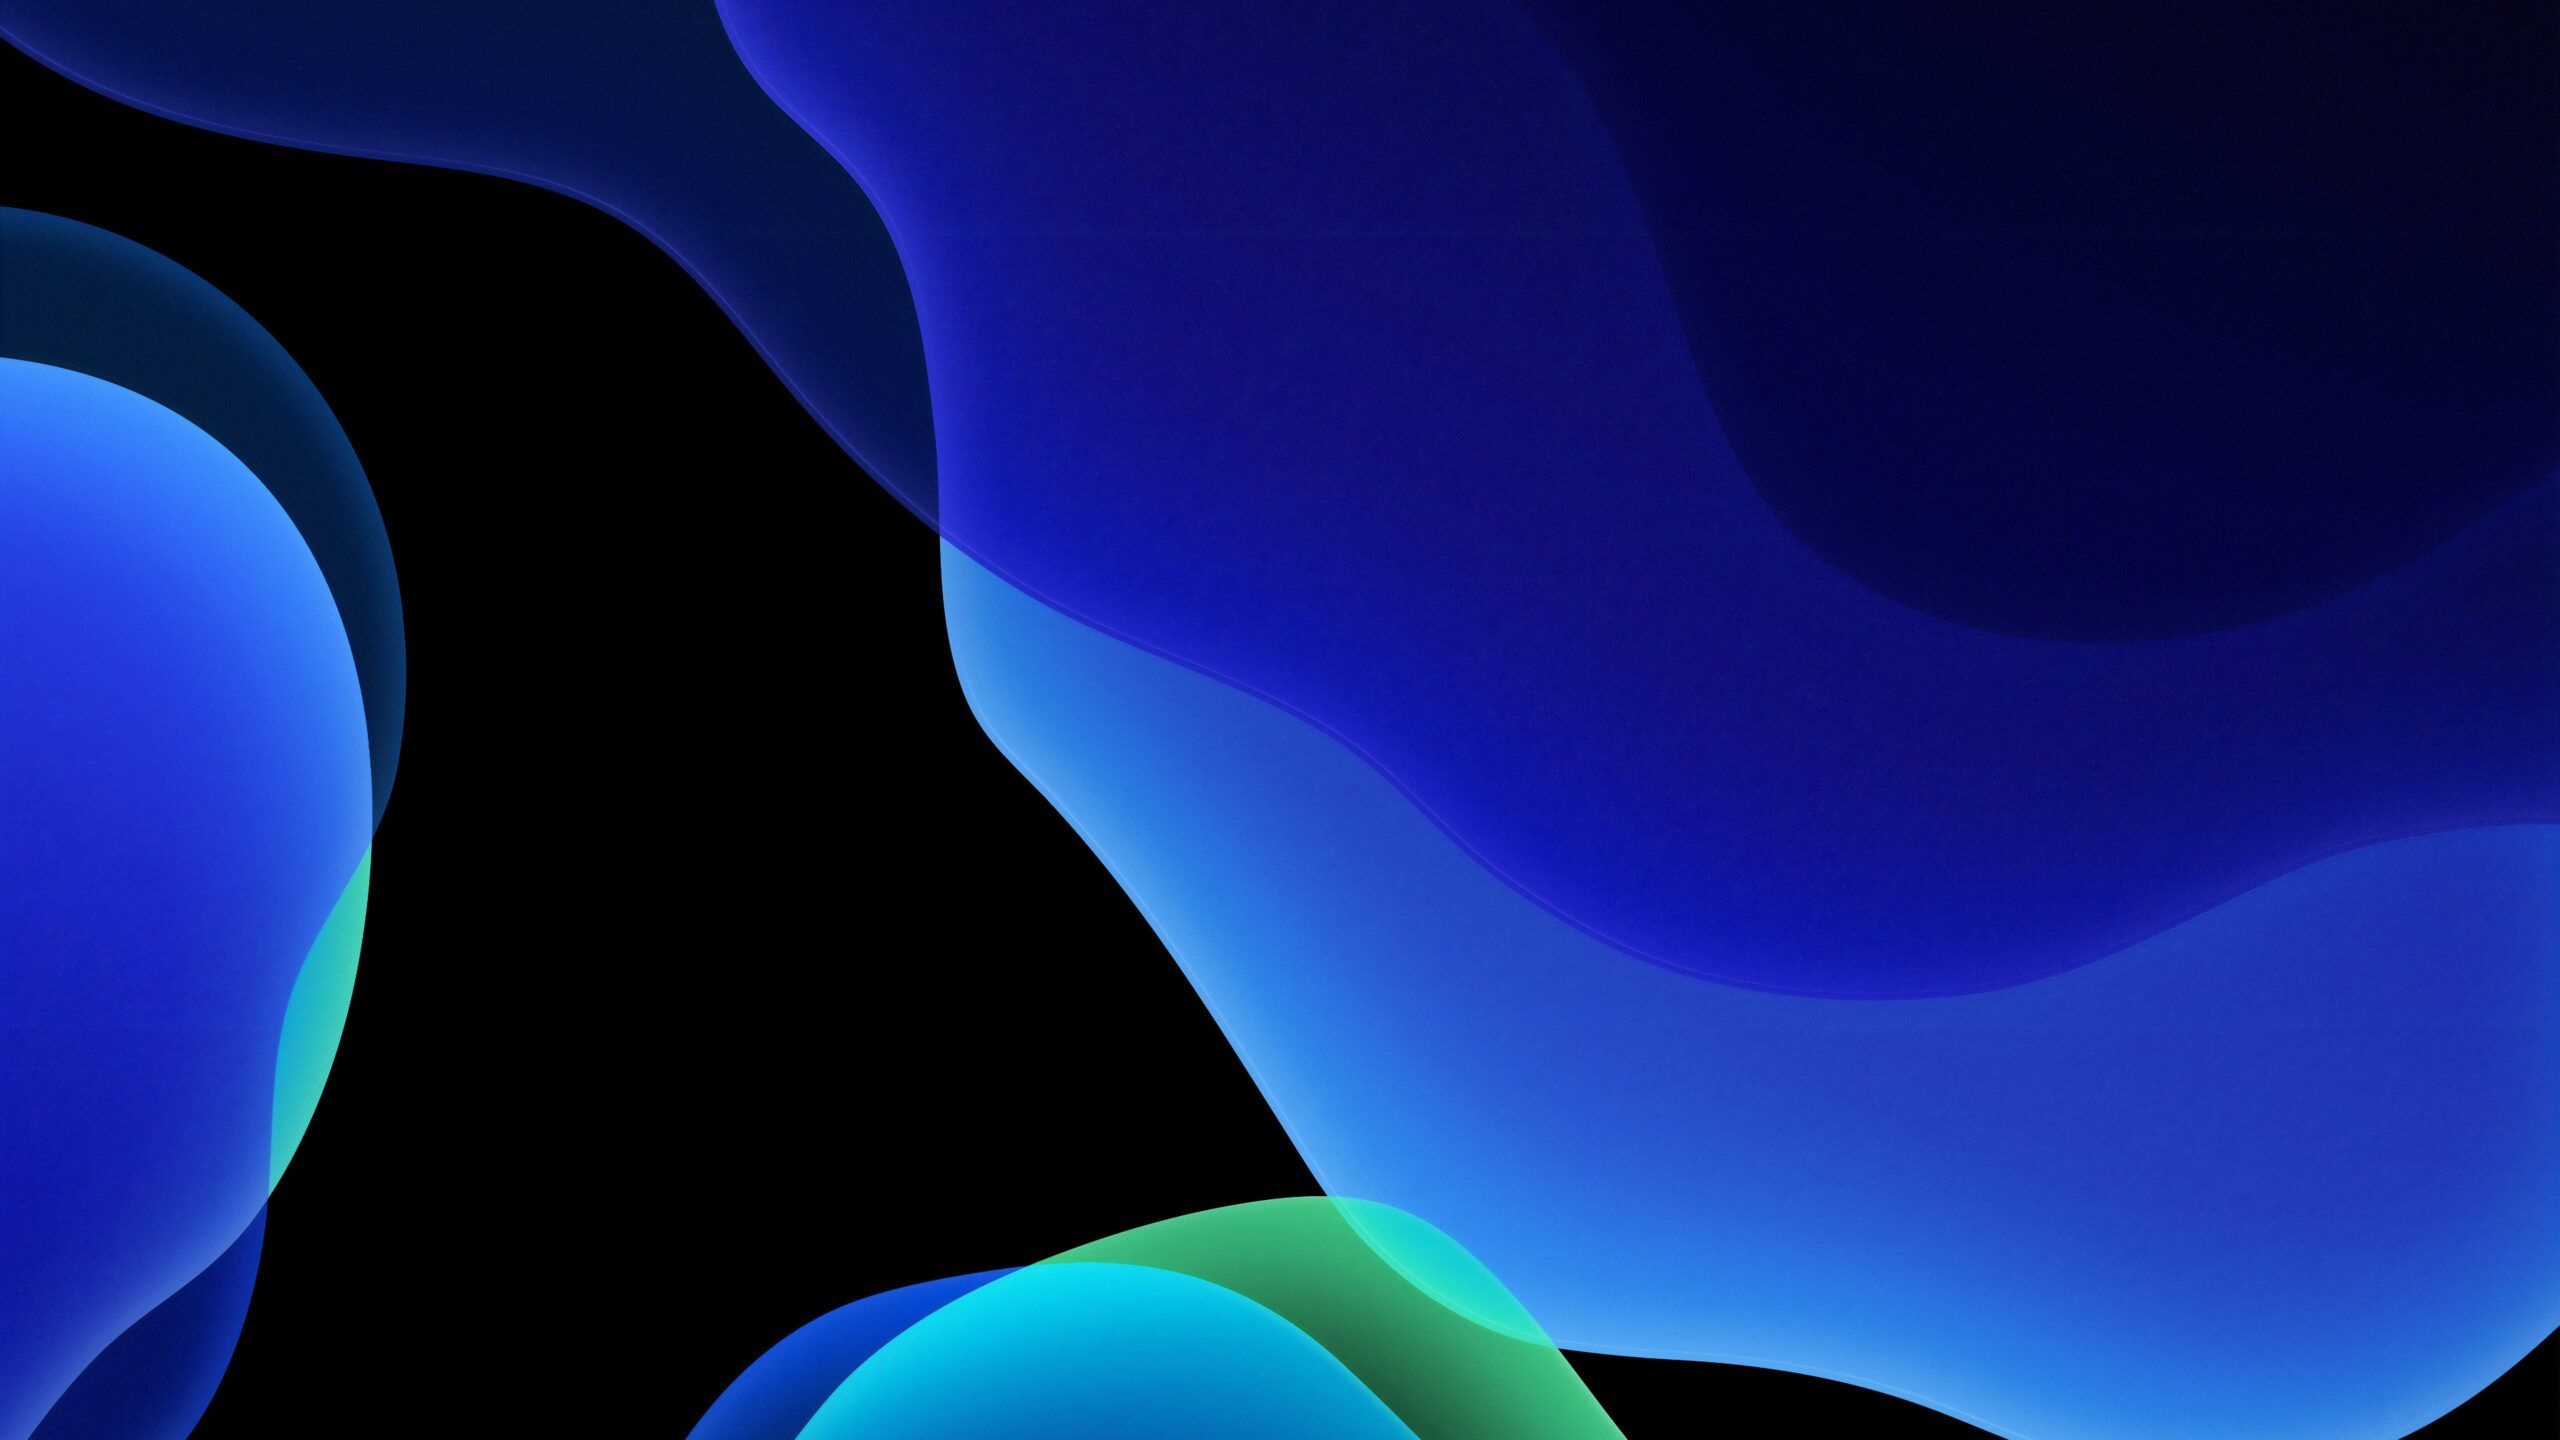 Download the new iOS 13 wallpaper for iPhone and iPad - Dark blue